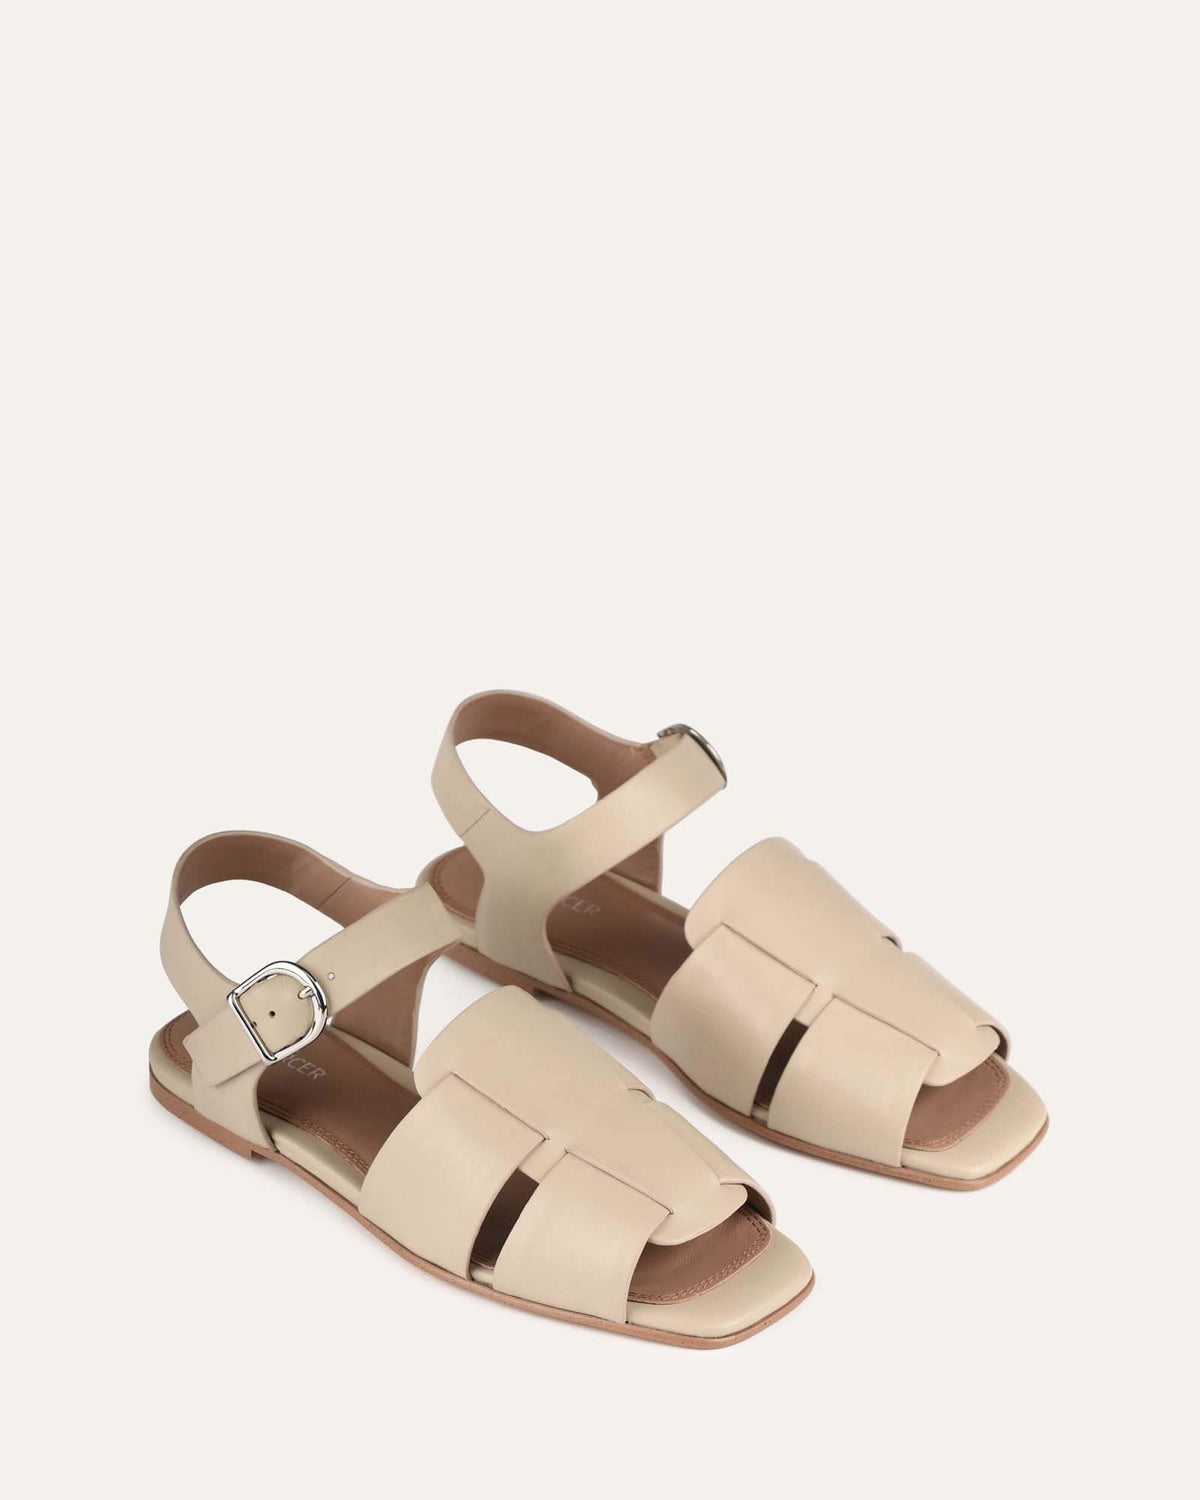 TABOR FLAT SANDALS NATURAL LEATHER